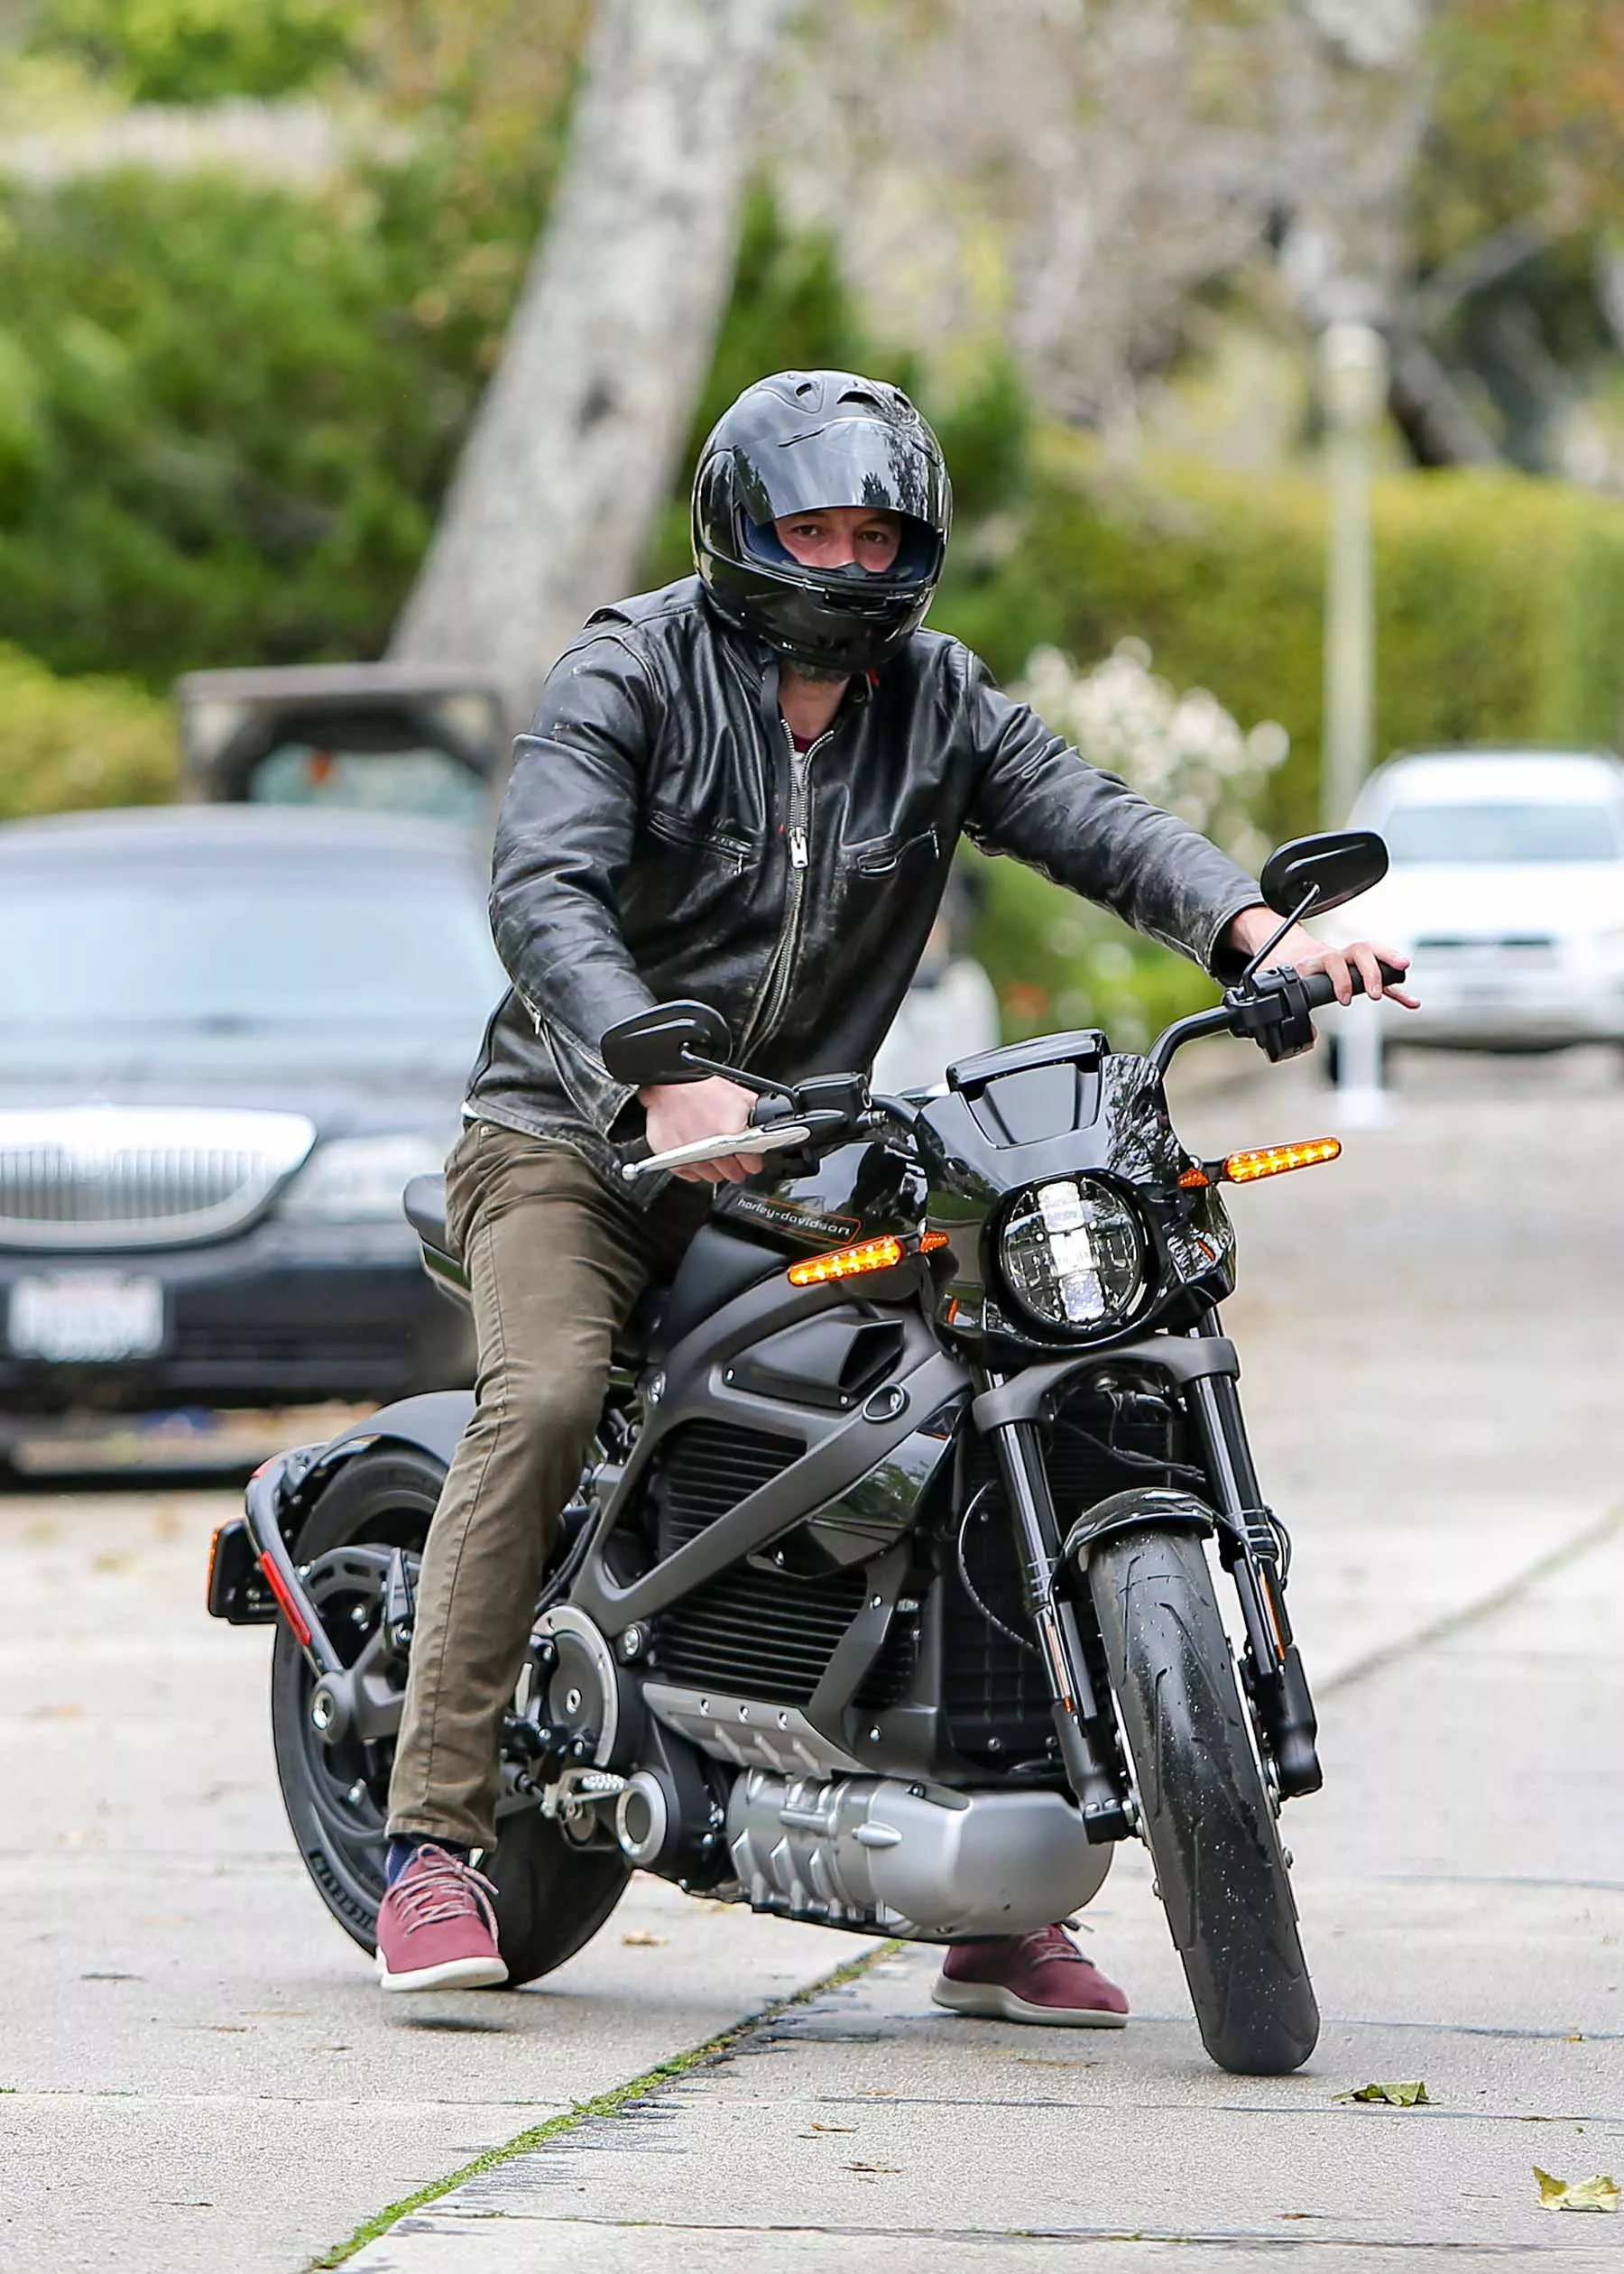 Ben Affleck was spotted riding the LiveWire, Harley-Davidson’s electric motorcycle.